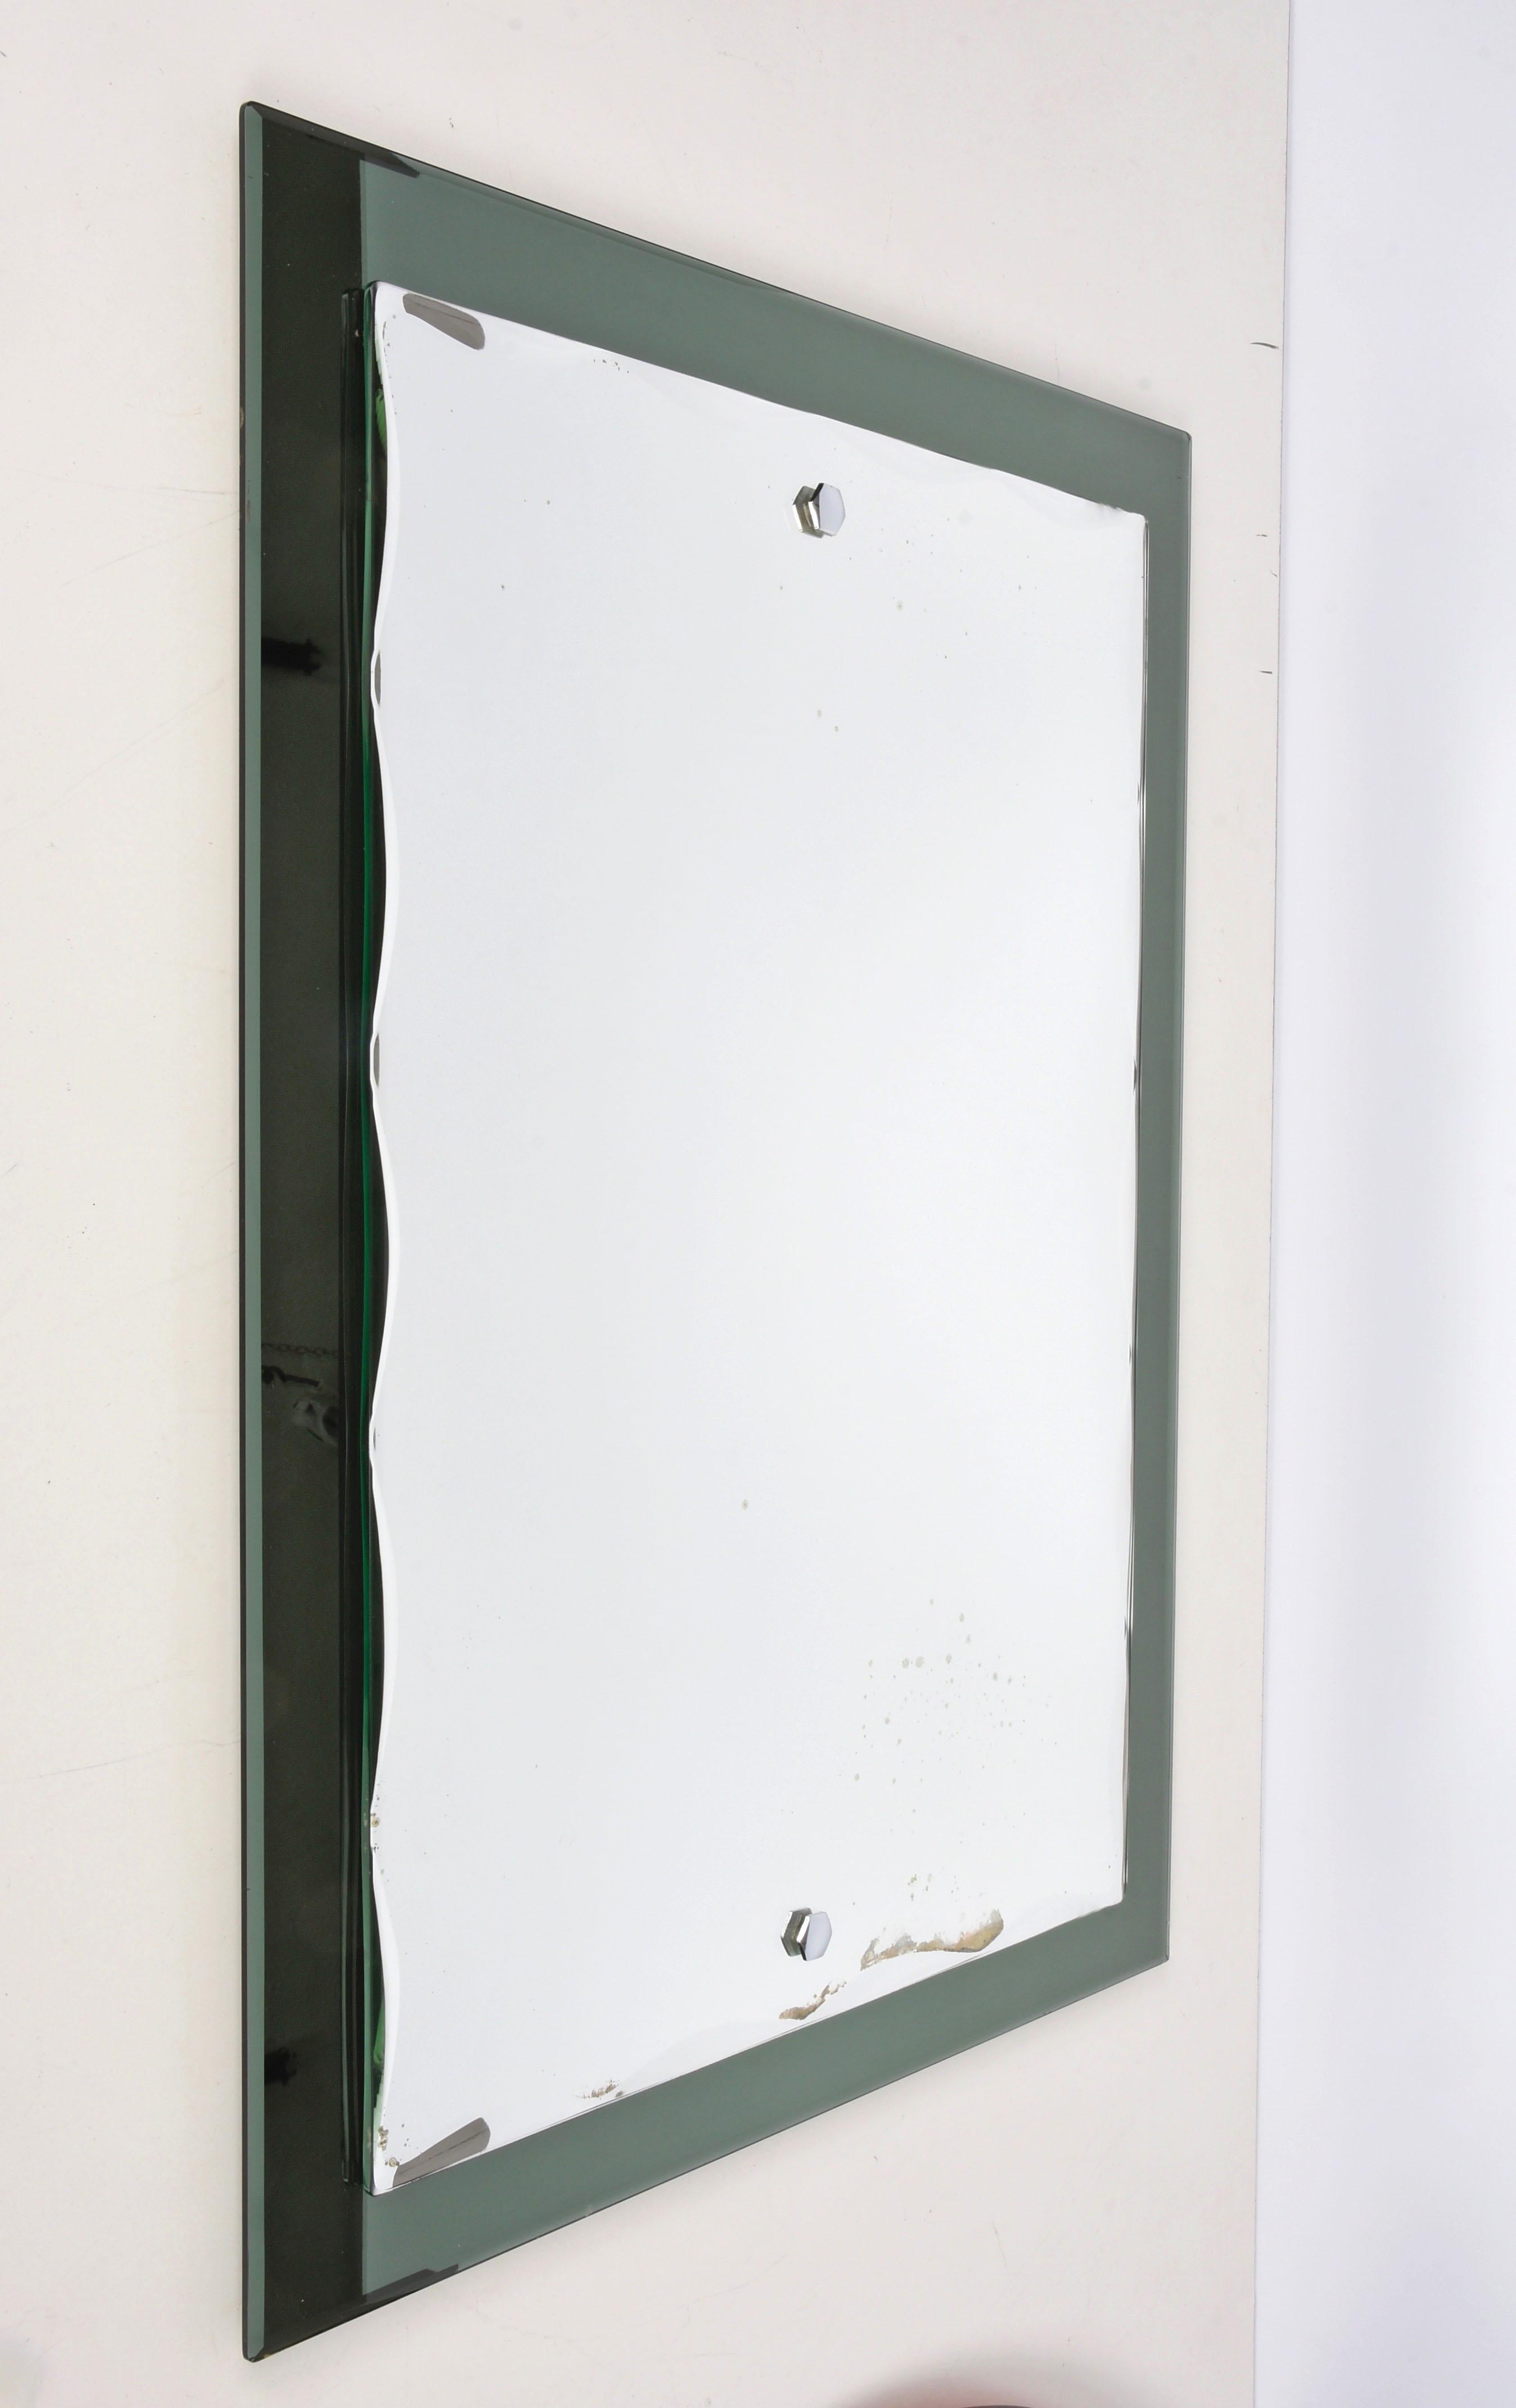 Beautiful midcentury mirror with olive green glass frame and carved rectangular mirror. This Italian mirror was designed in the style of Cristal Arte and was made in Italy during the 1960s.

This piece is an example of excellent Italian